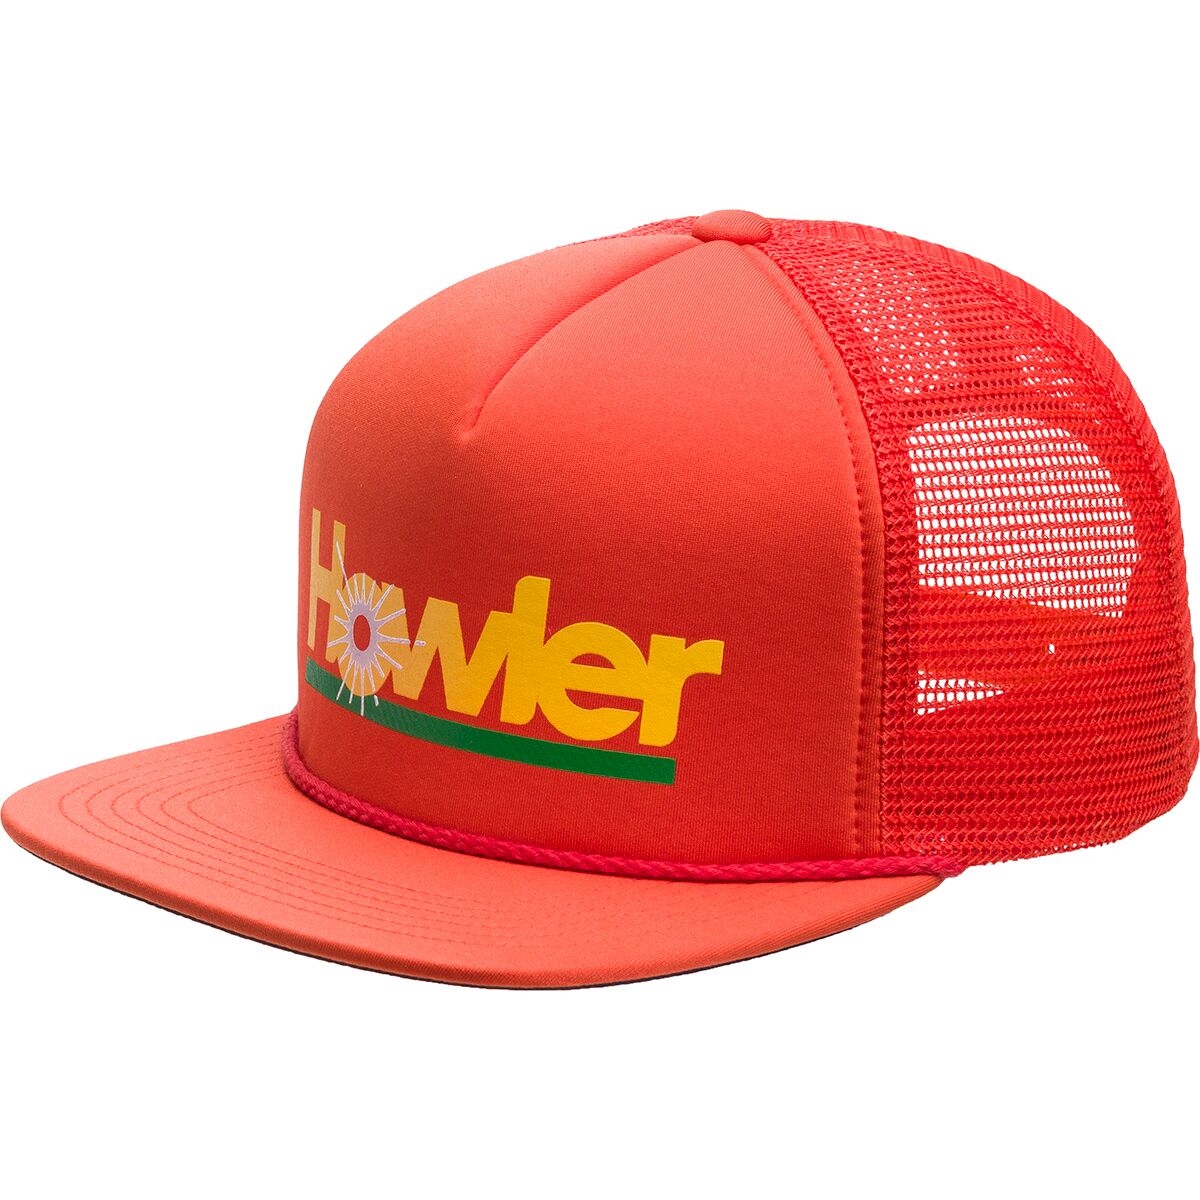 Howler Brothers Howler Plantain Structured Snapback Hat